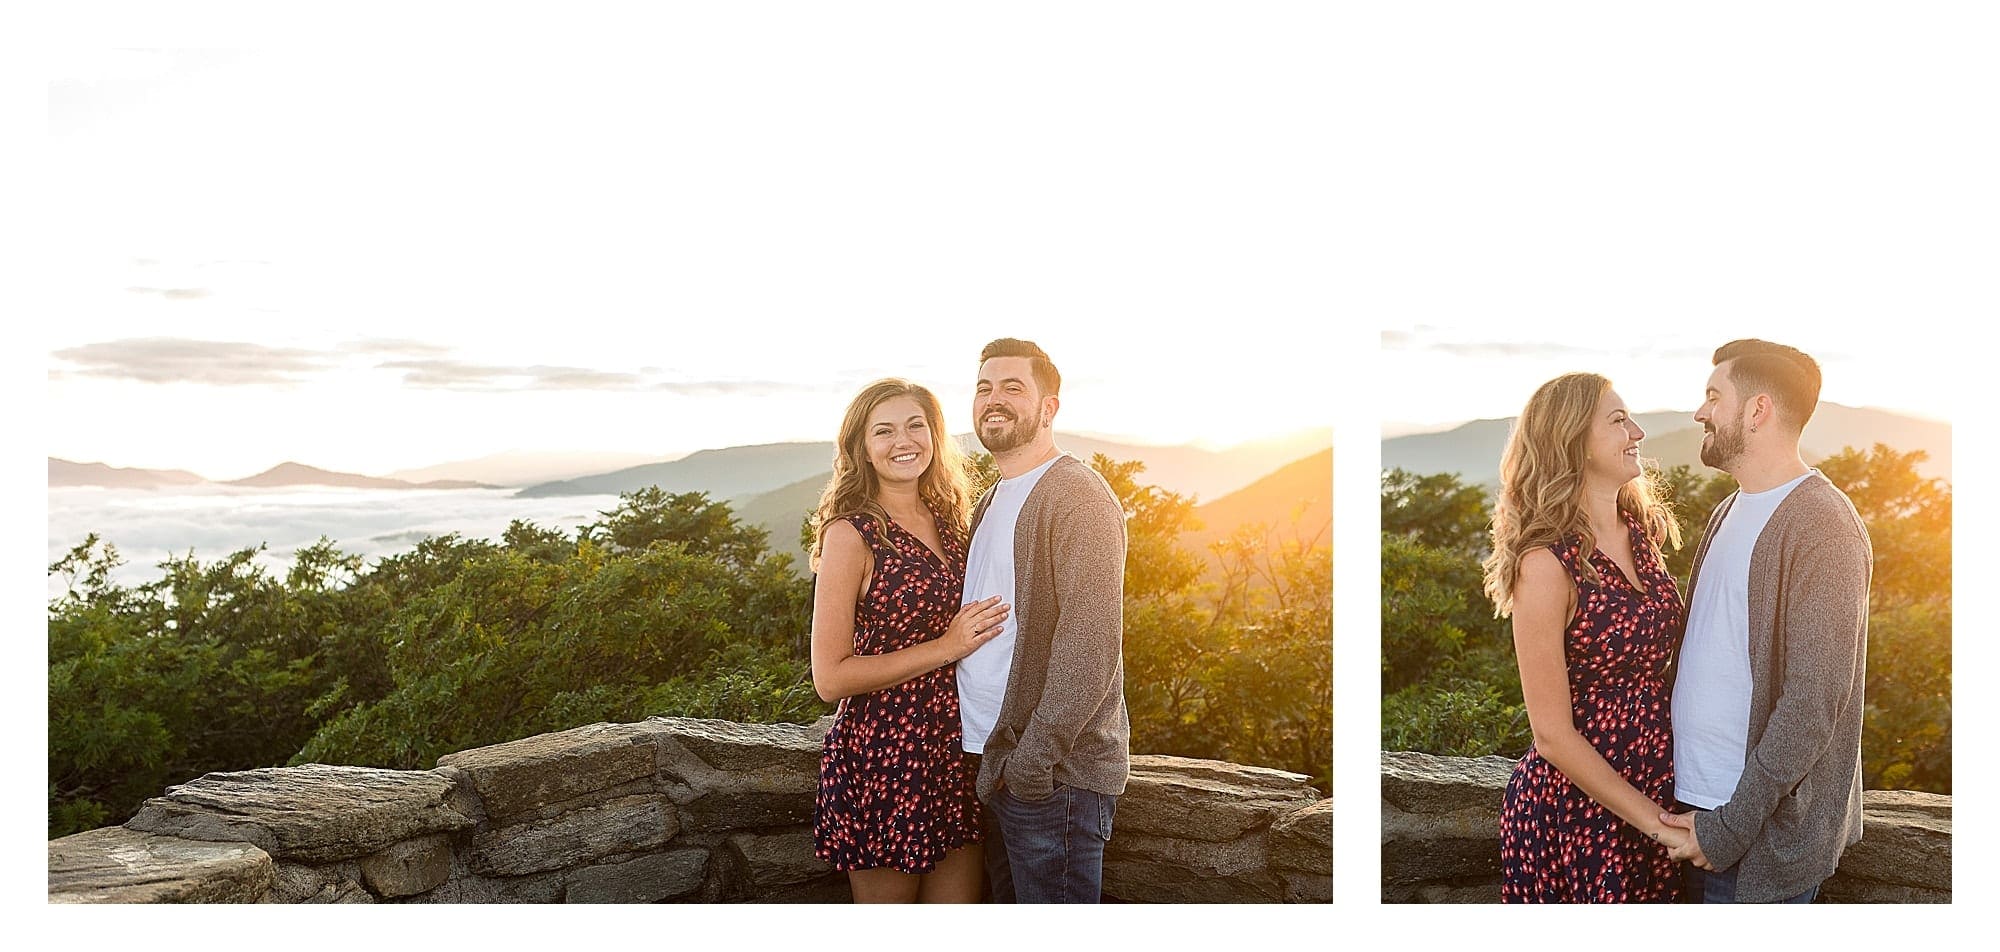 Engaged couple smiling at camera with sunrise and mountains in background